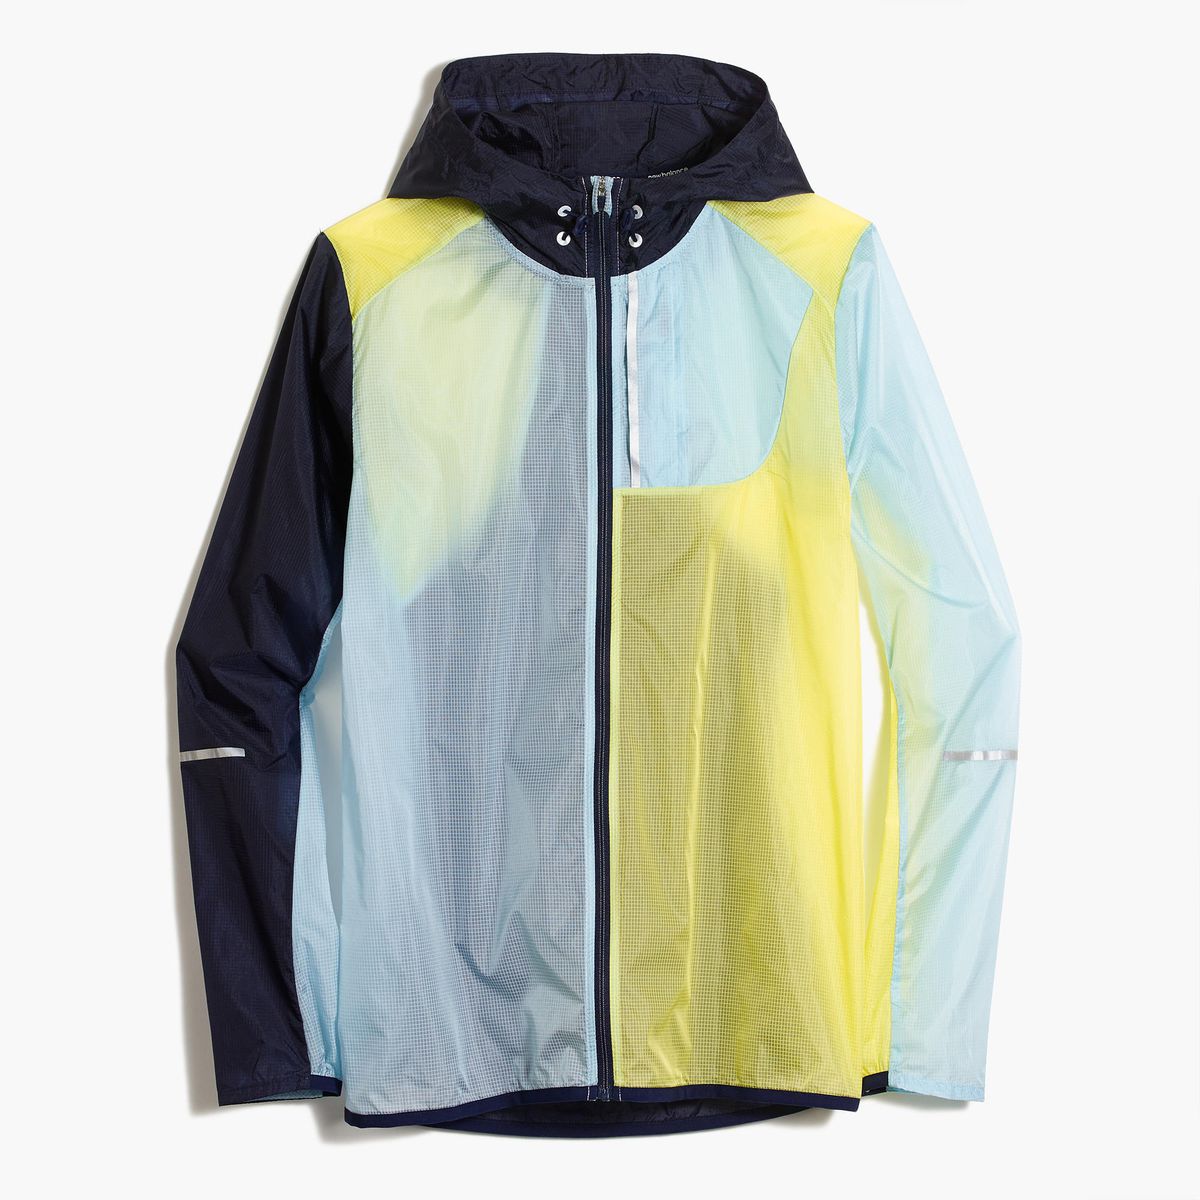 New Balance for J. Crew Packable Colorblock Jacket